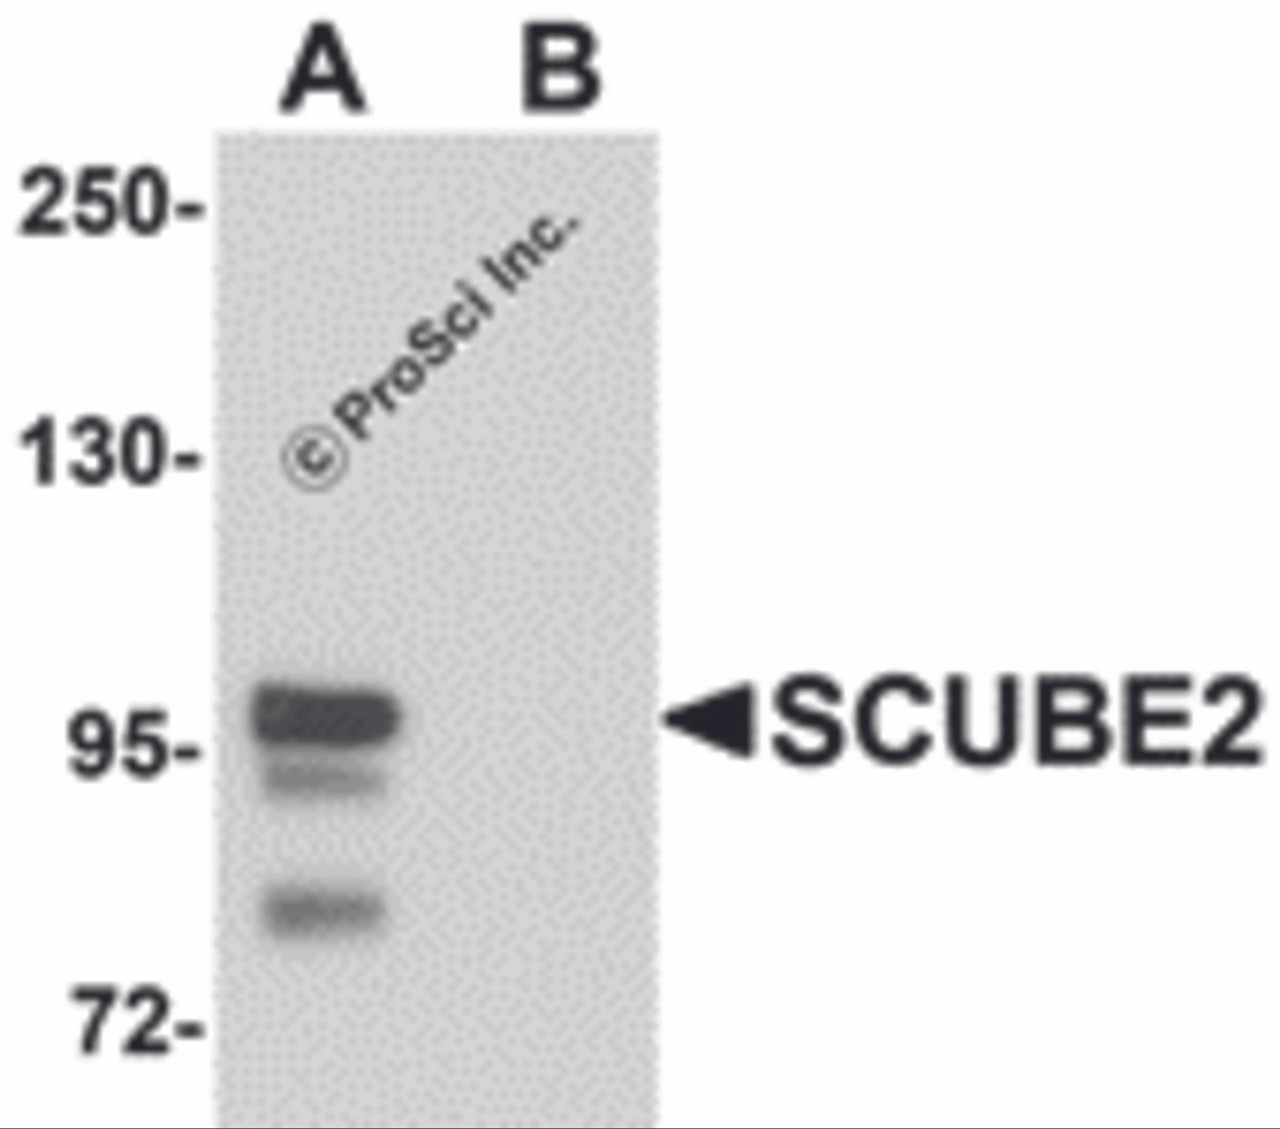 Western blot analysis of SCUBE2 in Daudi cell lysate with SCUBE2 antibody at 1 &#956;g/mL in (A) the absence and (B) the presence of blocking peptide.